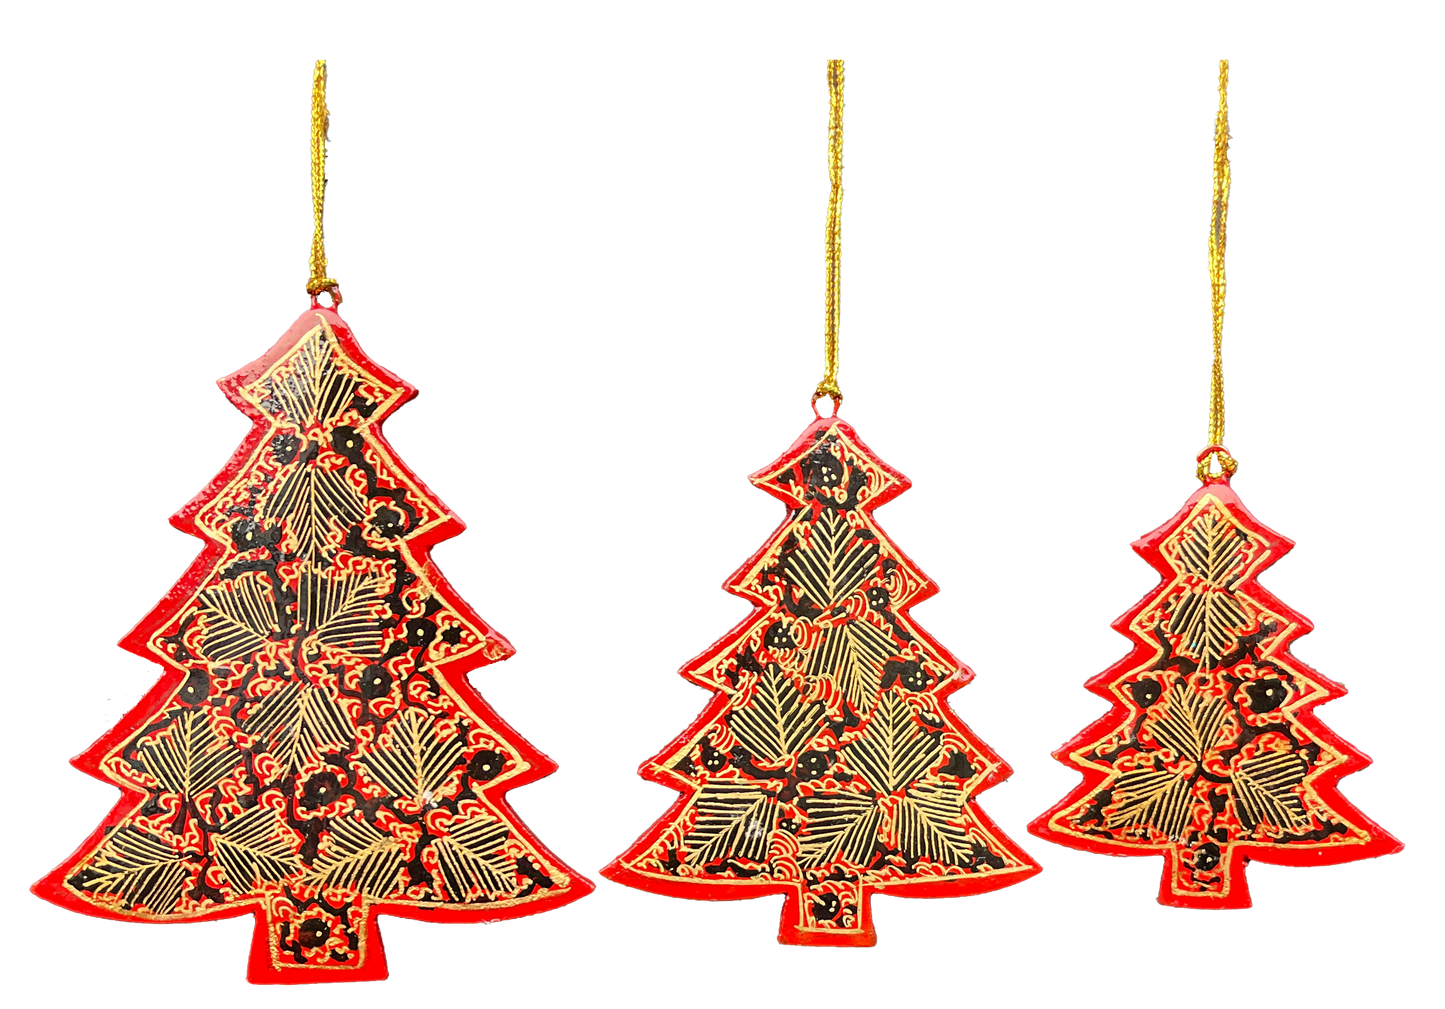 Assorted Wood Hanging Xmas Trees - SET OF 3